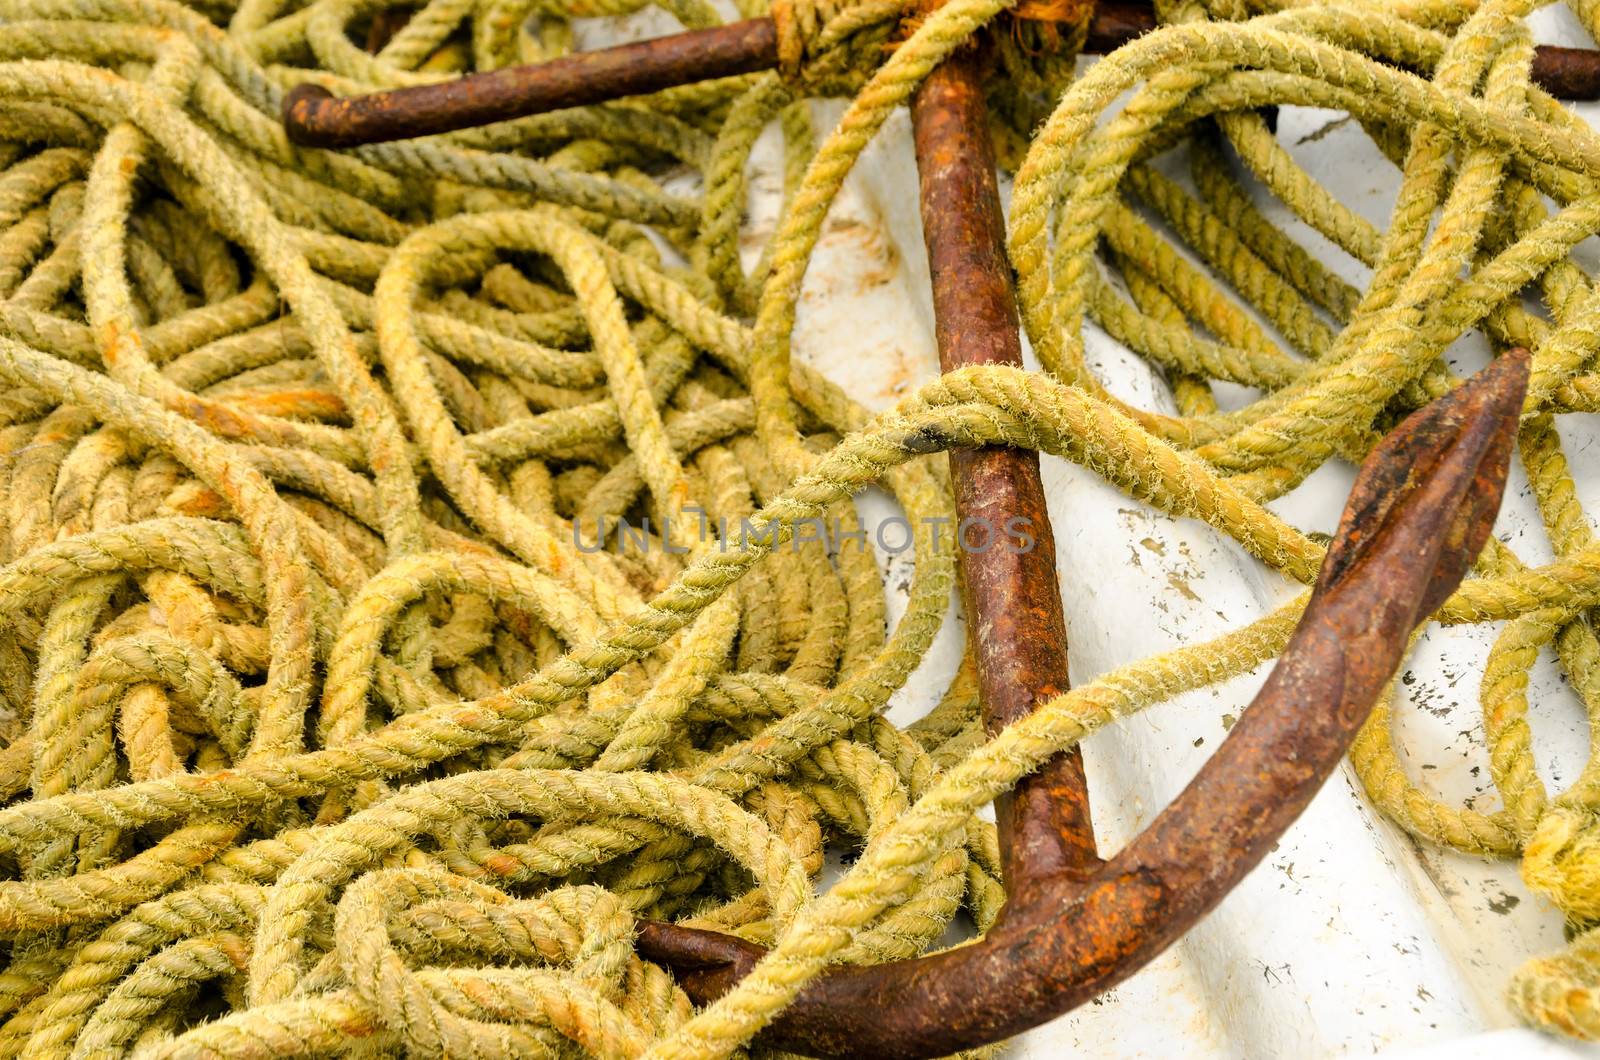 Old rusted anchor and old yellow rope